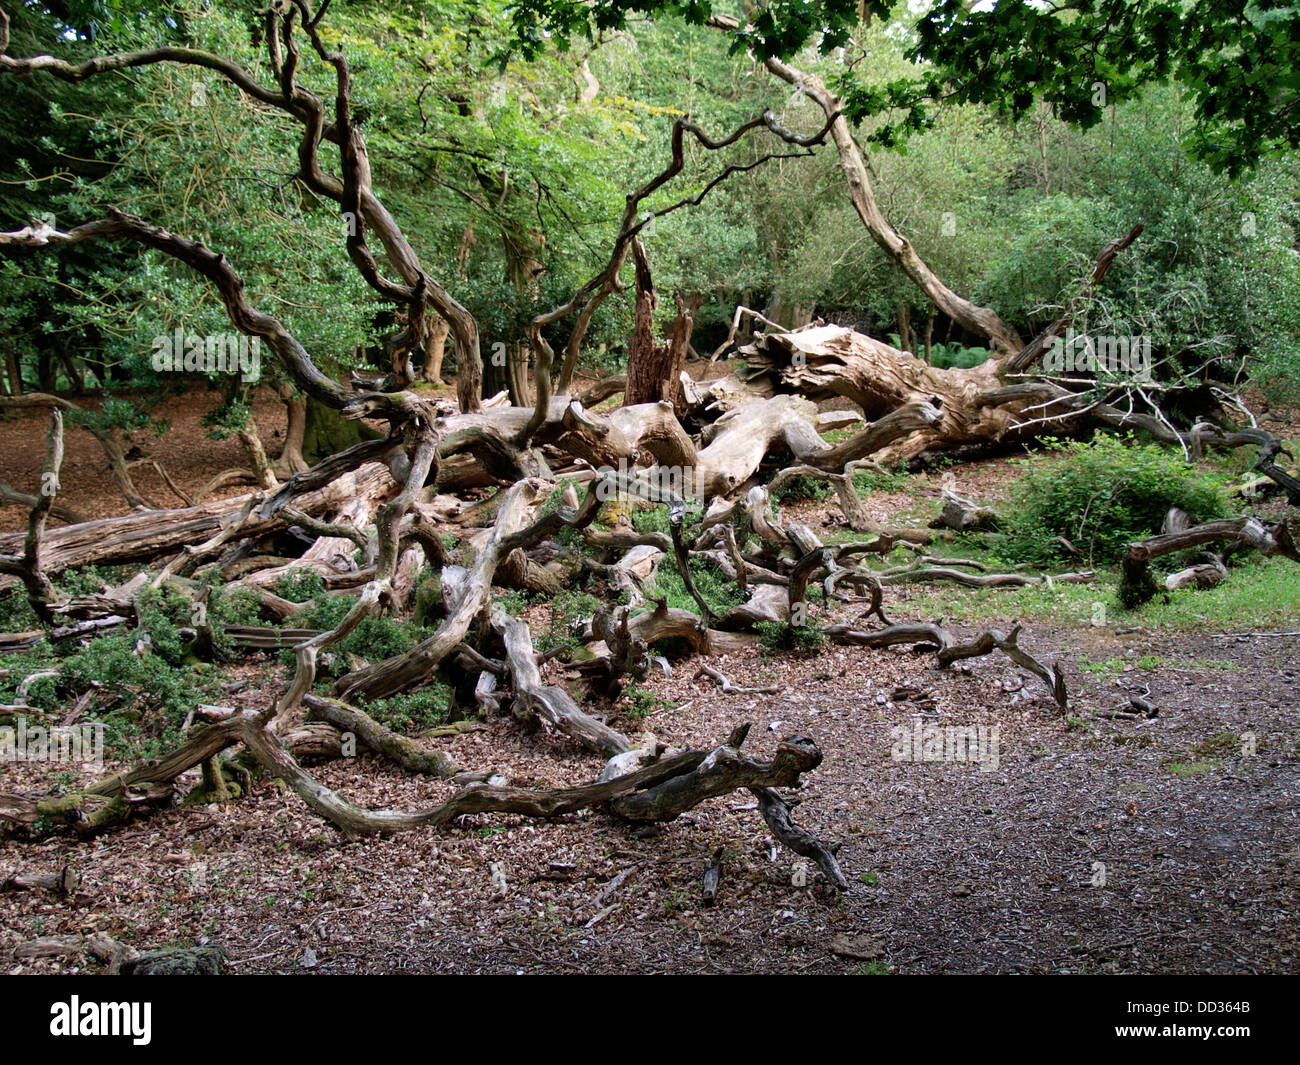 Fallen tree decaying in forest, New Forest, Hampshire, UK 2013 Stock Photo